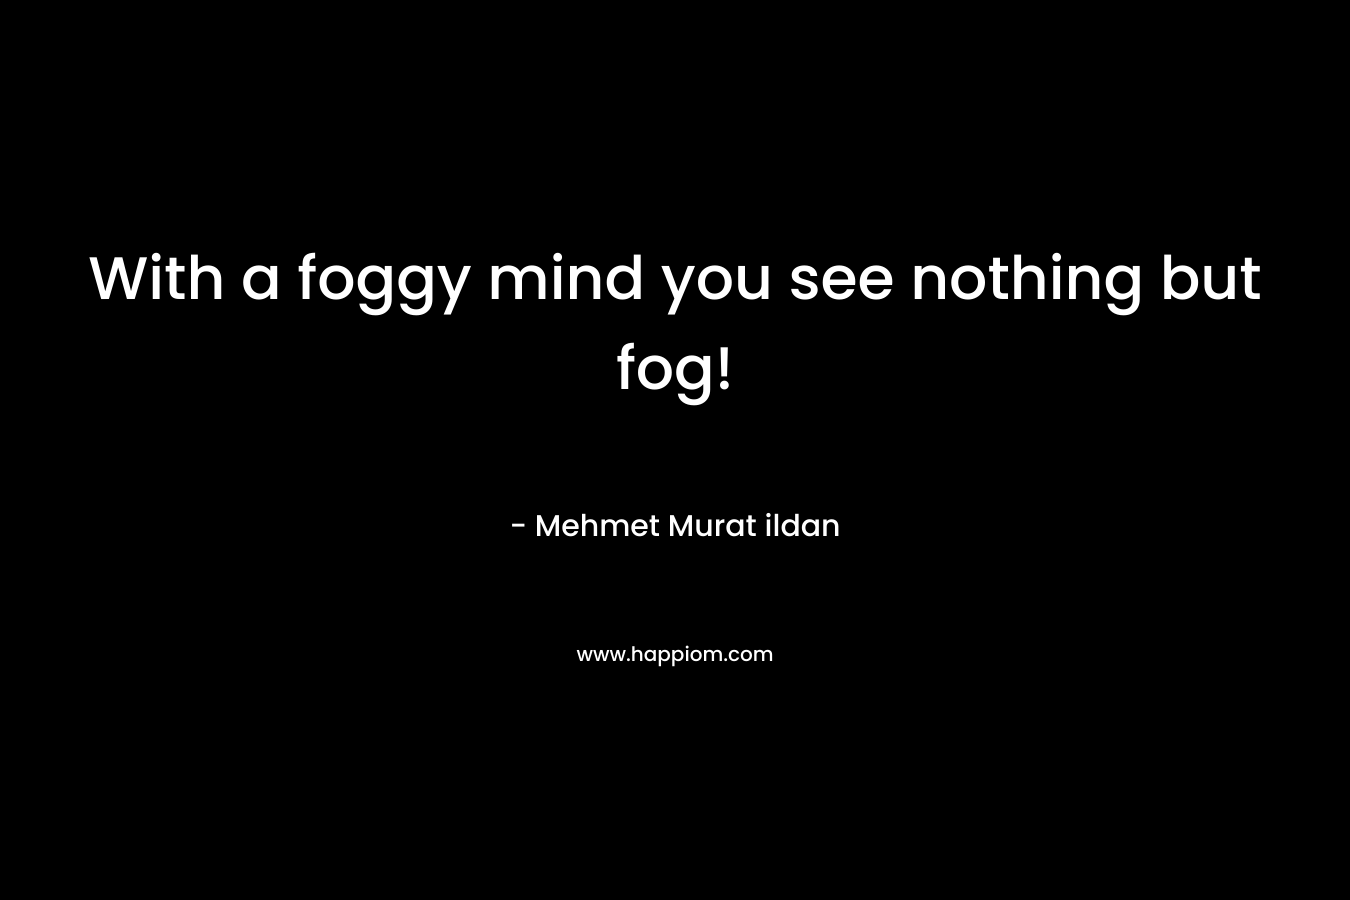 With a foggy mind you see nothing but fog!